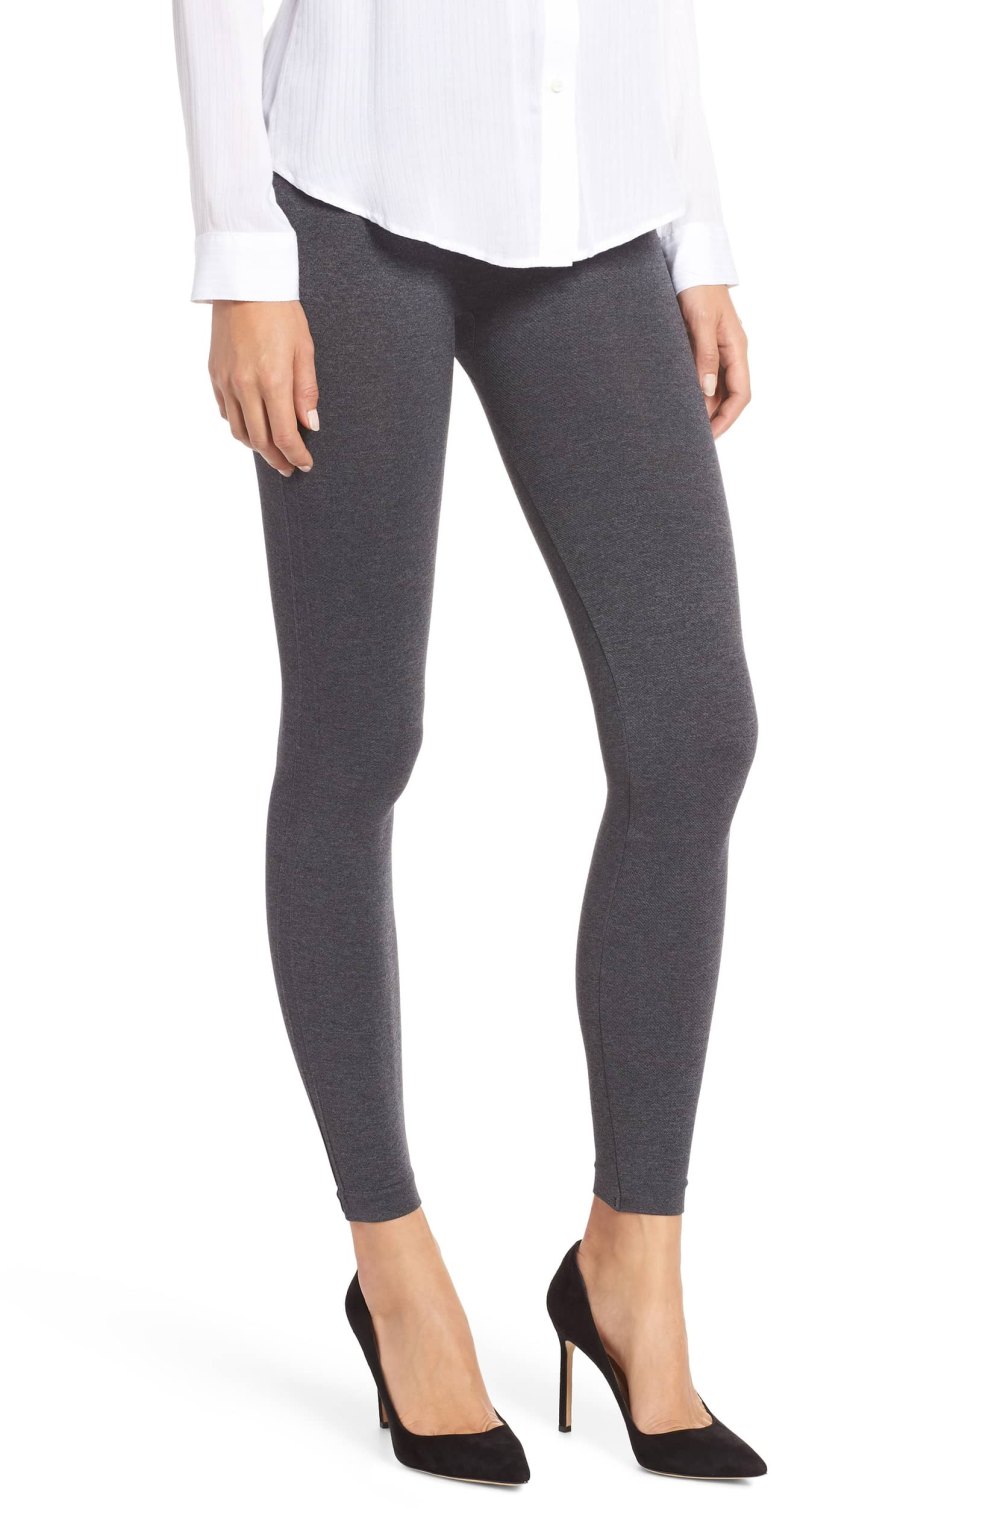 https://www.usmagazine.com/wp-content/uploads/2018/10/SPANX-Look-at-Me-Now-Seamless-Leggings-1.jpg?w=1000&quality=86&strip=all